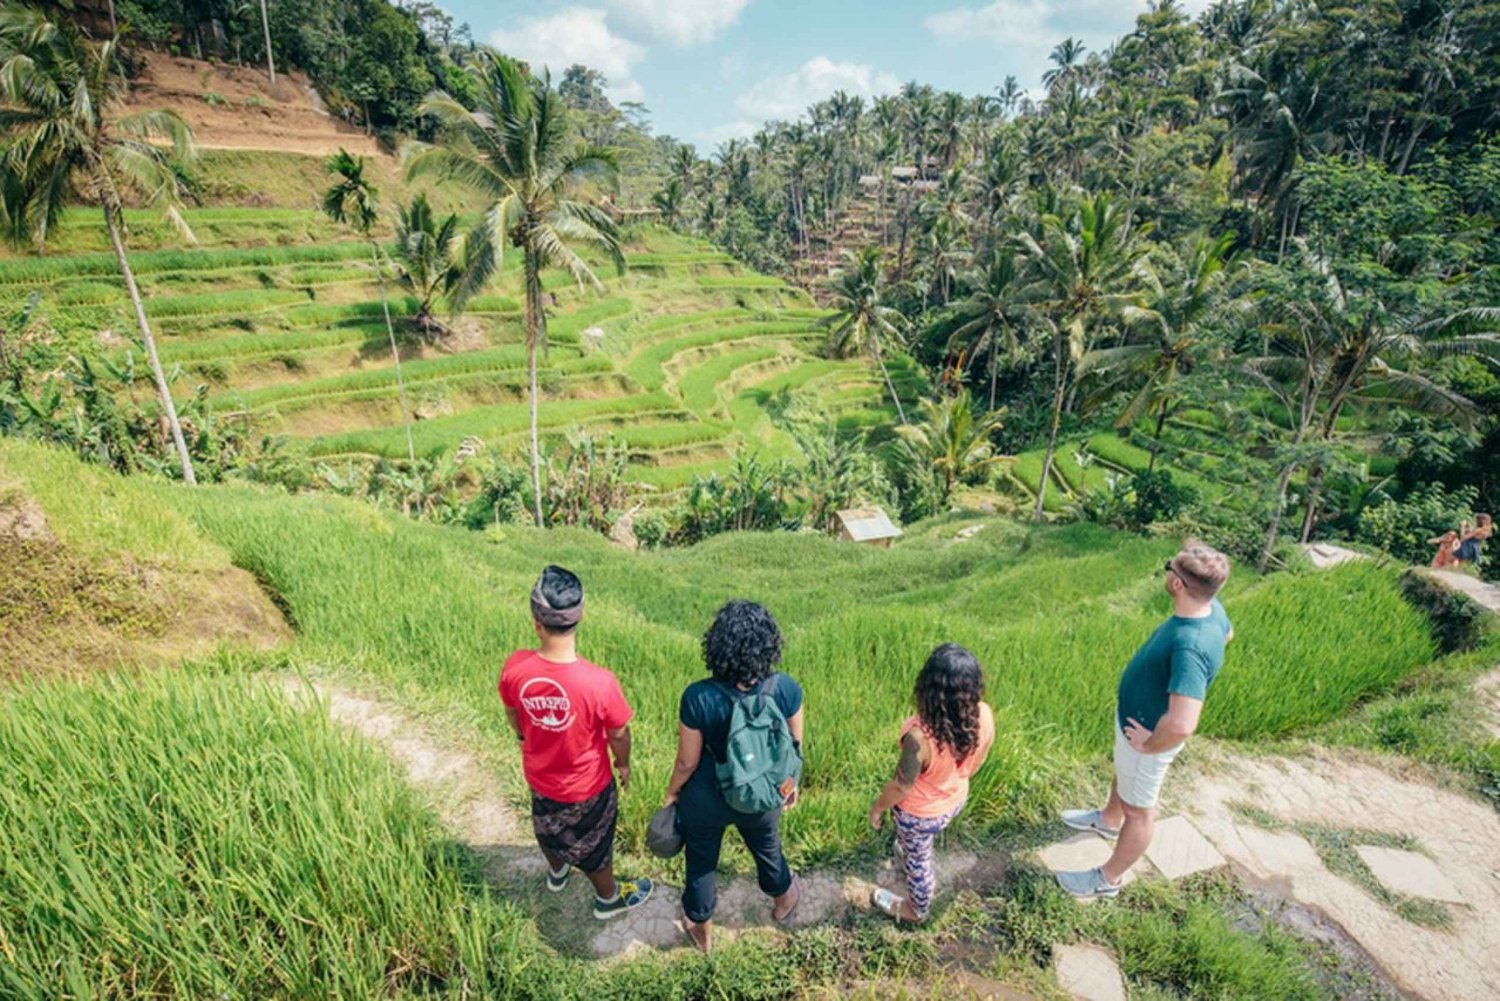 Hiking Experience in Bali: Rice Terraces Tour